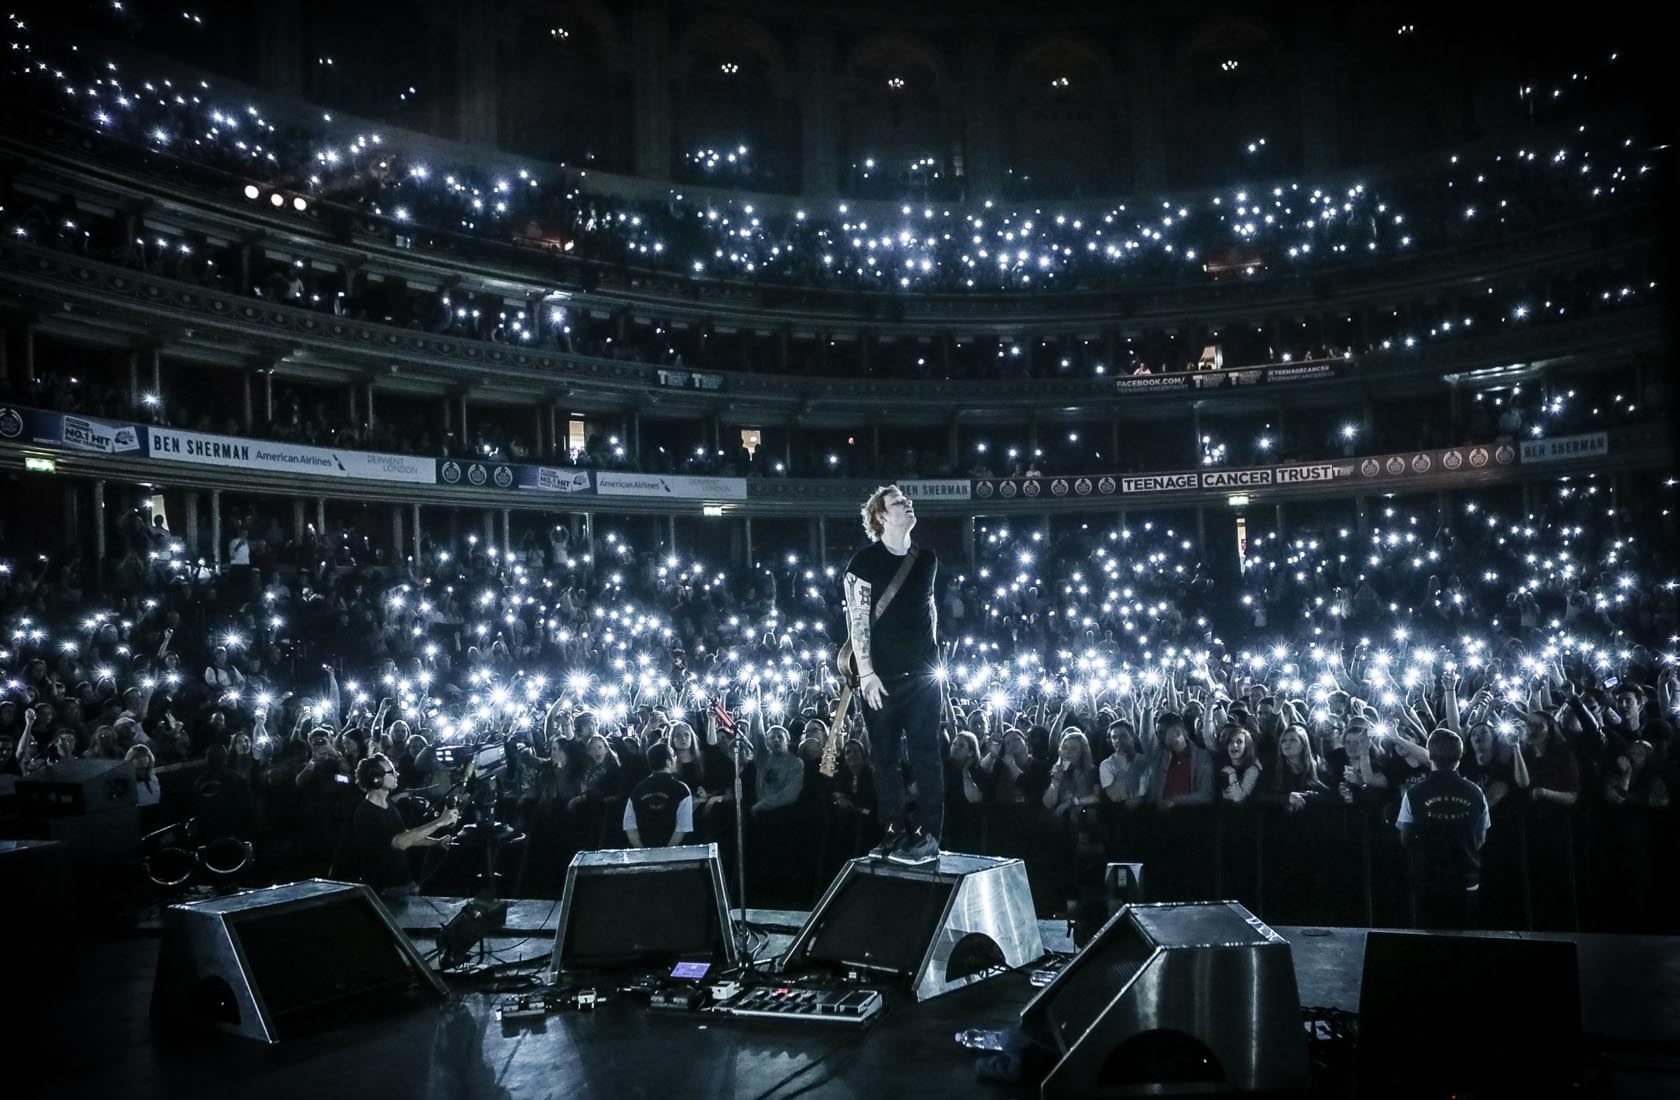 Ed Sheeran at the Royal Albert Hall for TCT by Christie Goodwin